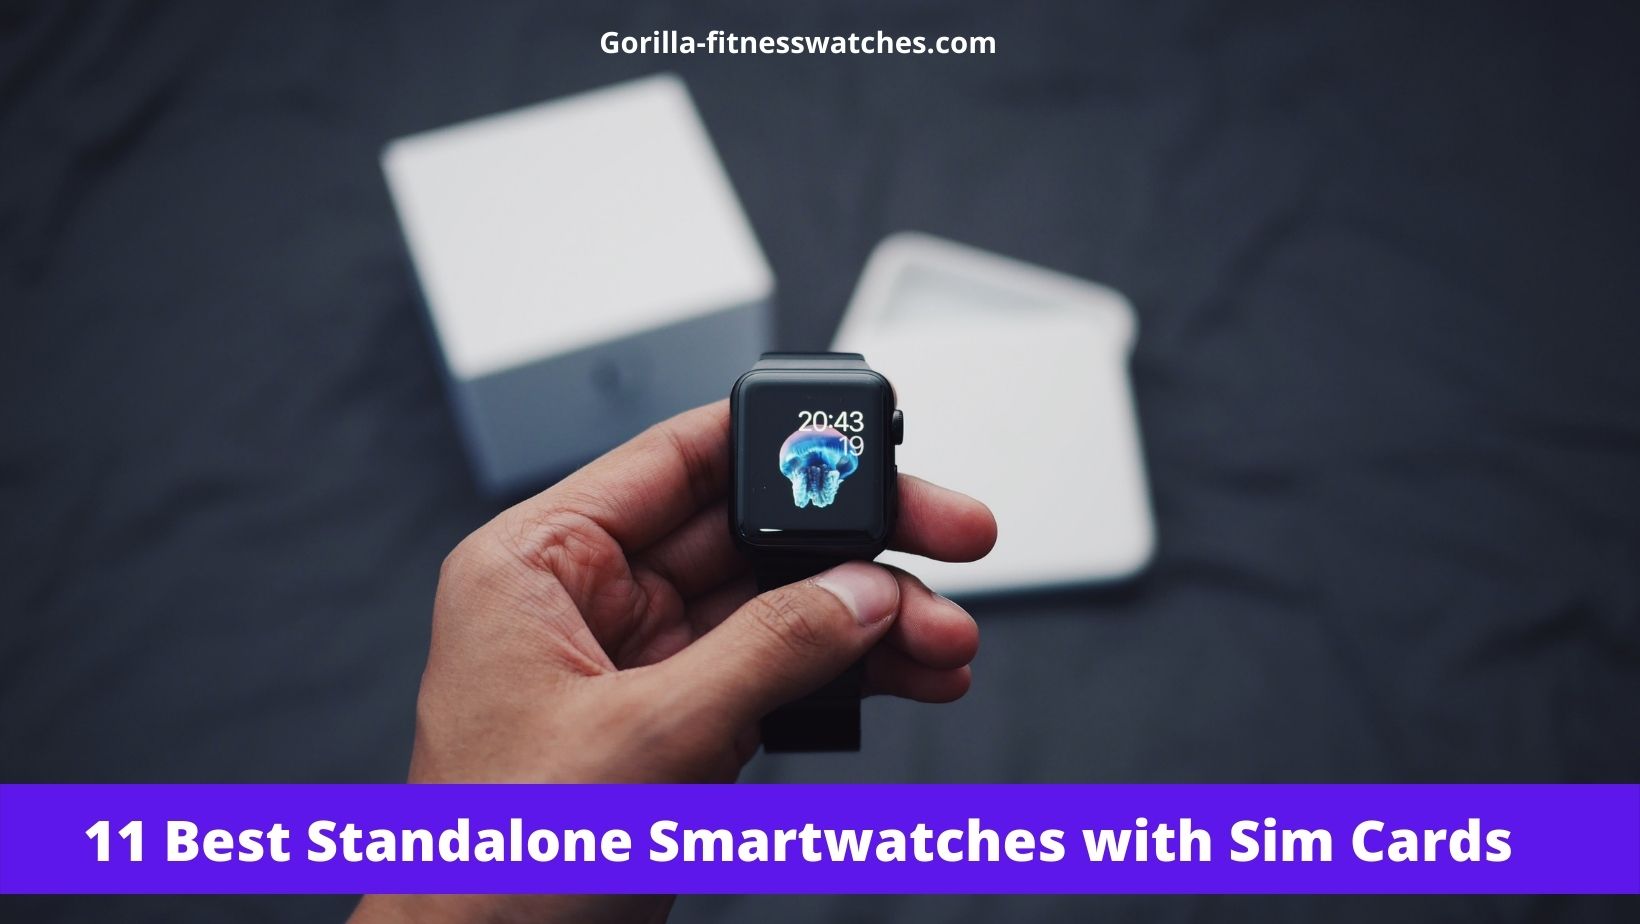 11 Best Standalone Smartwatches with Sim Cards